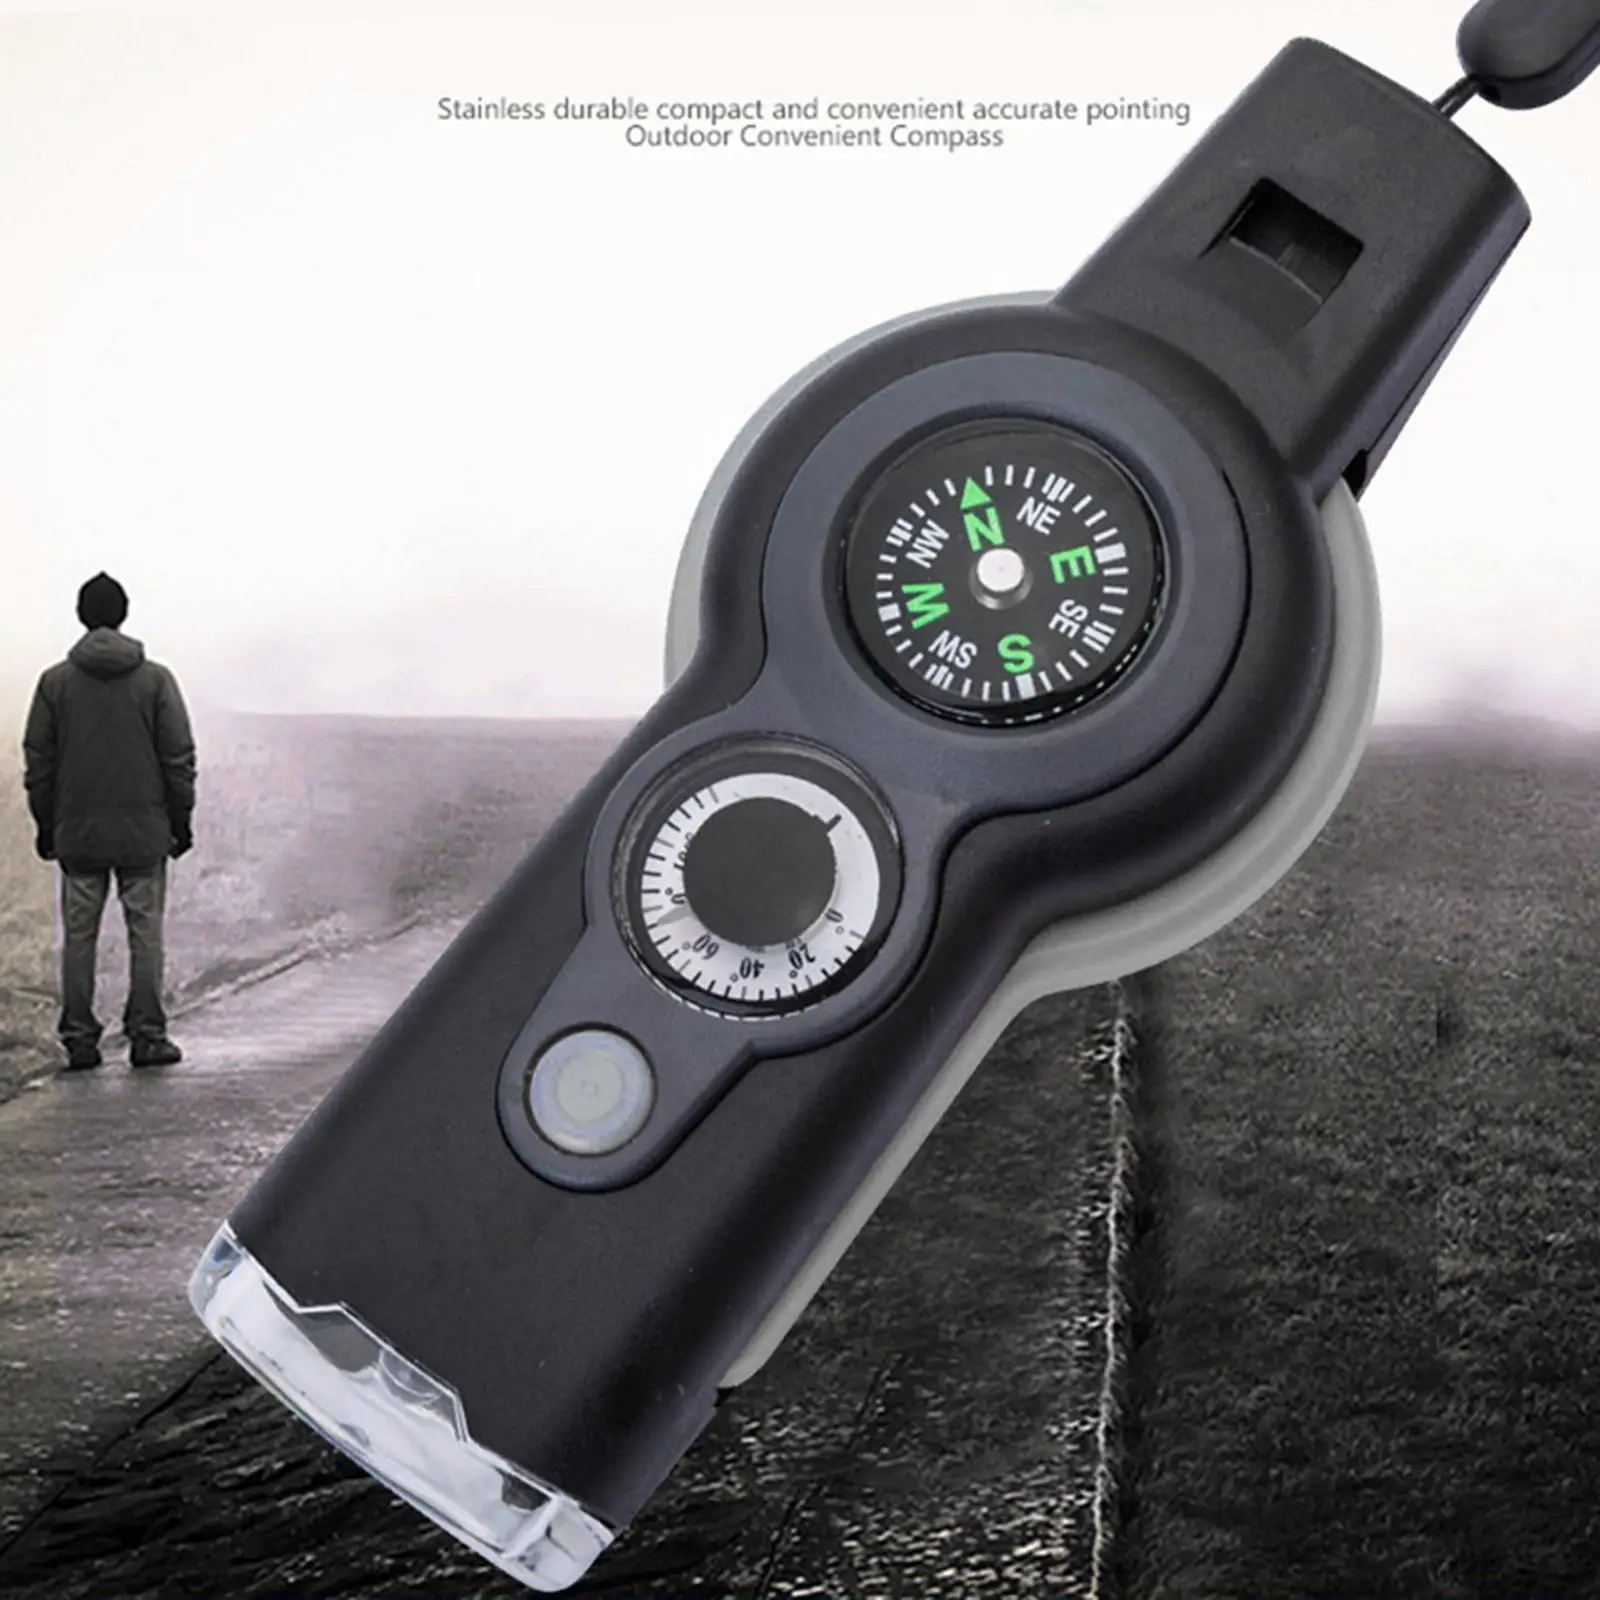 Emergency Survival Hiking Safety Whistle & Flashlight Compass